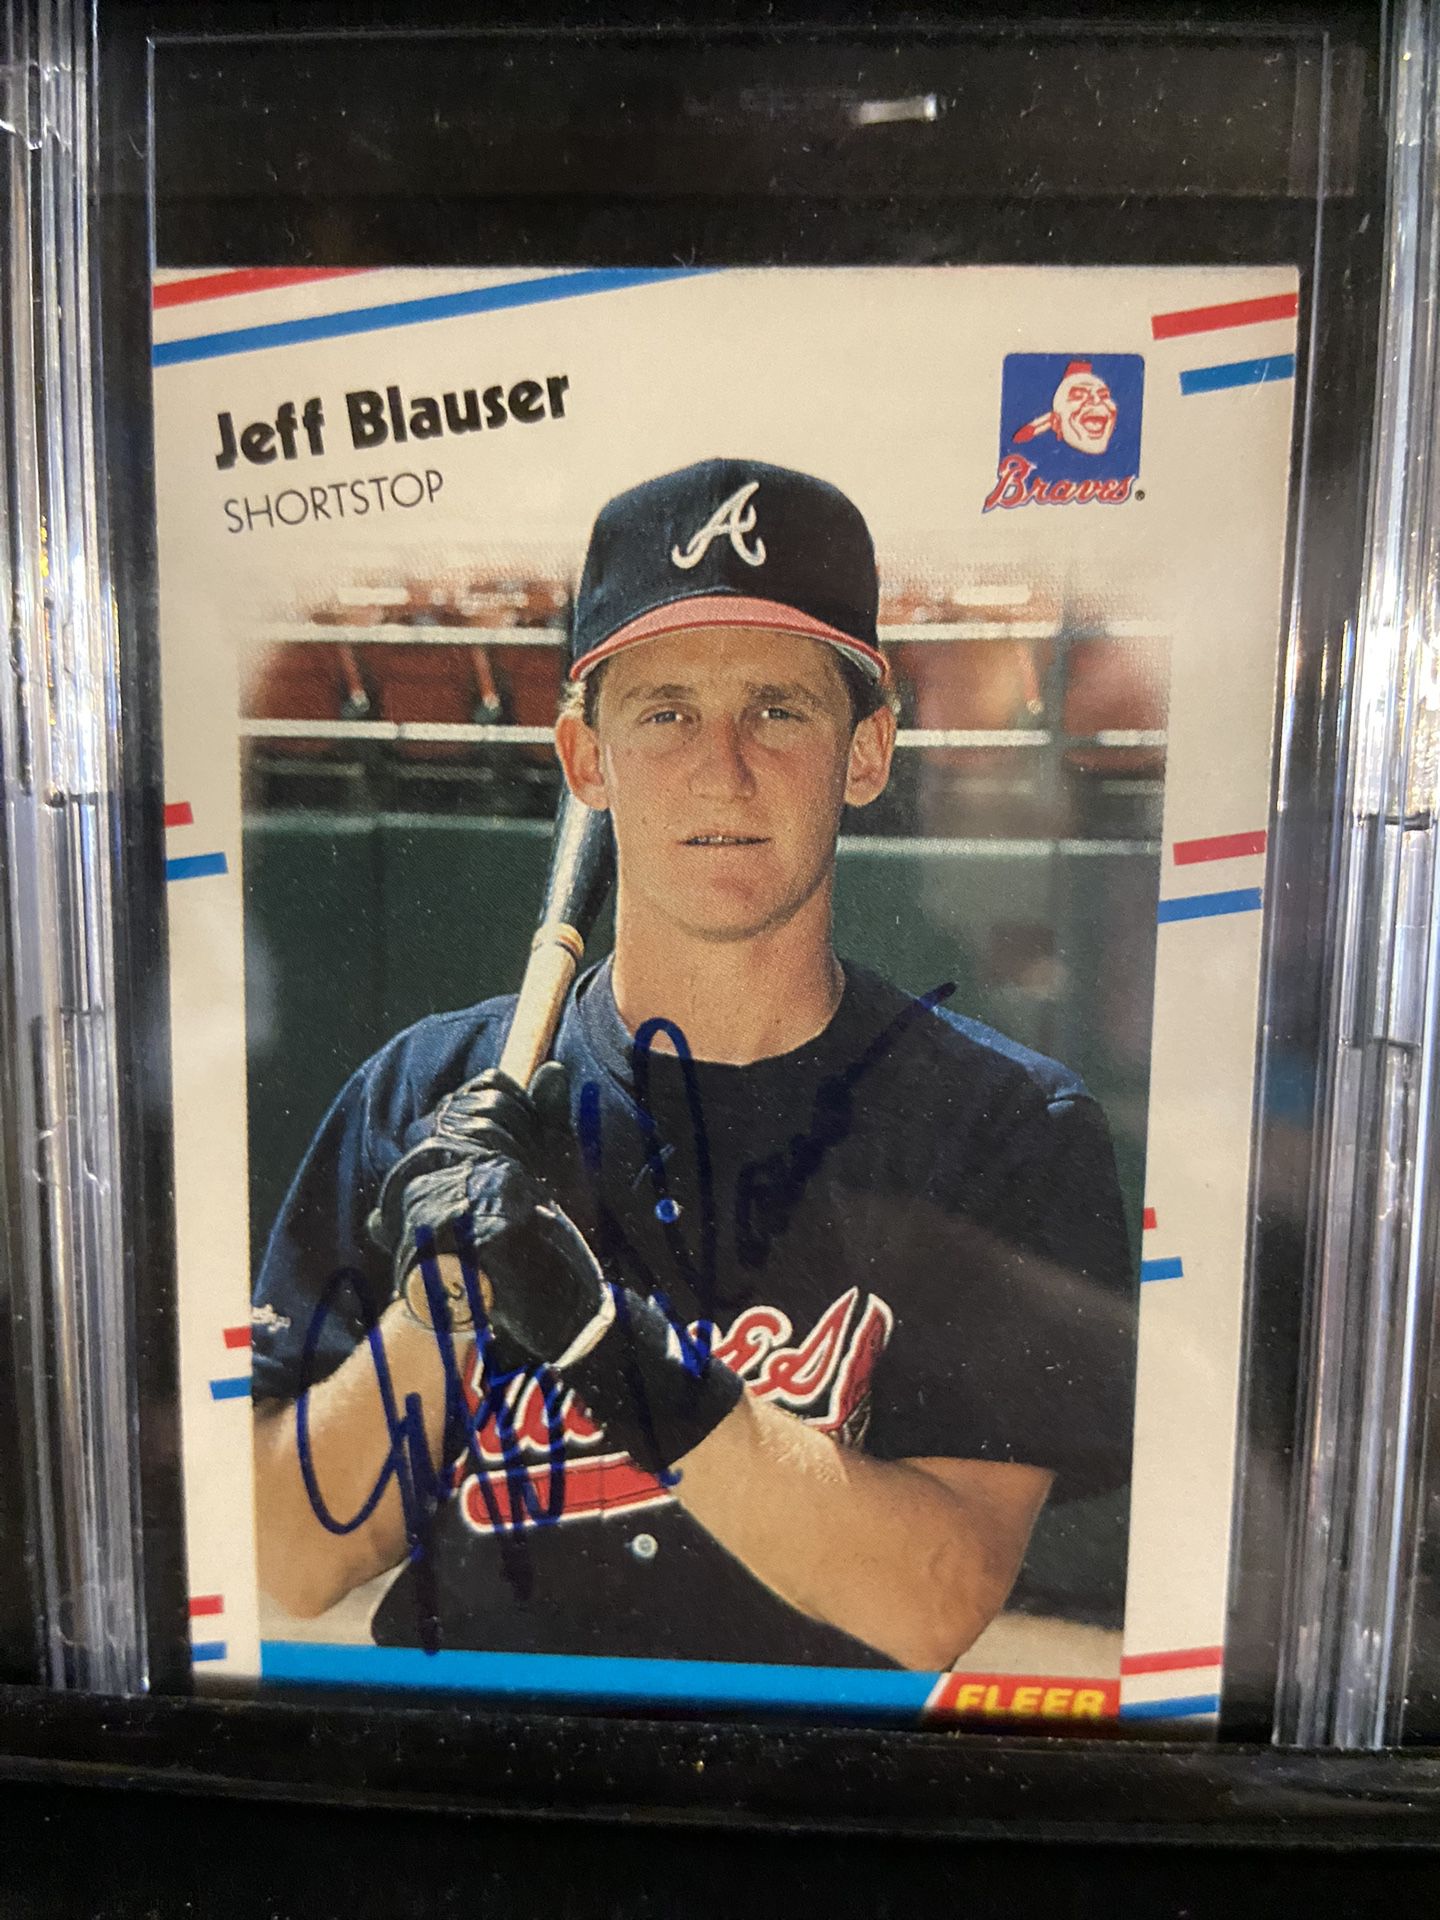 Jeff Blauser Autographed Card for Sale in Bedford Park, IL - OfferUp